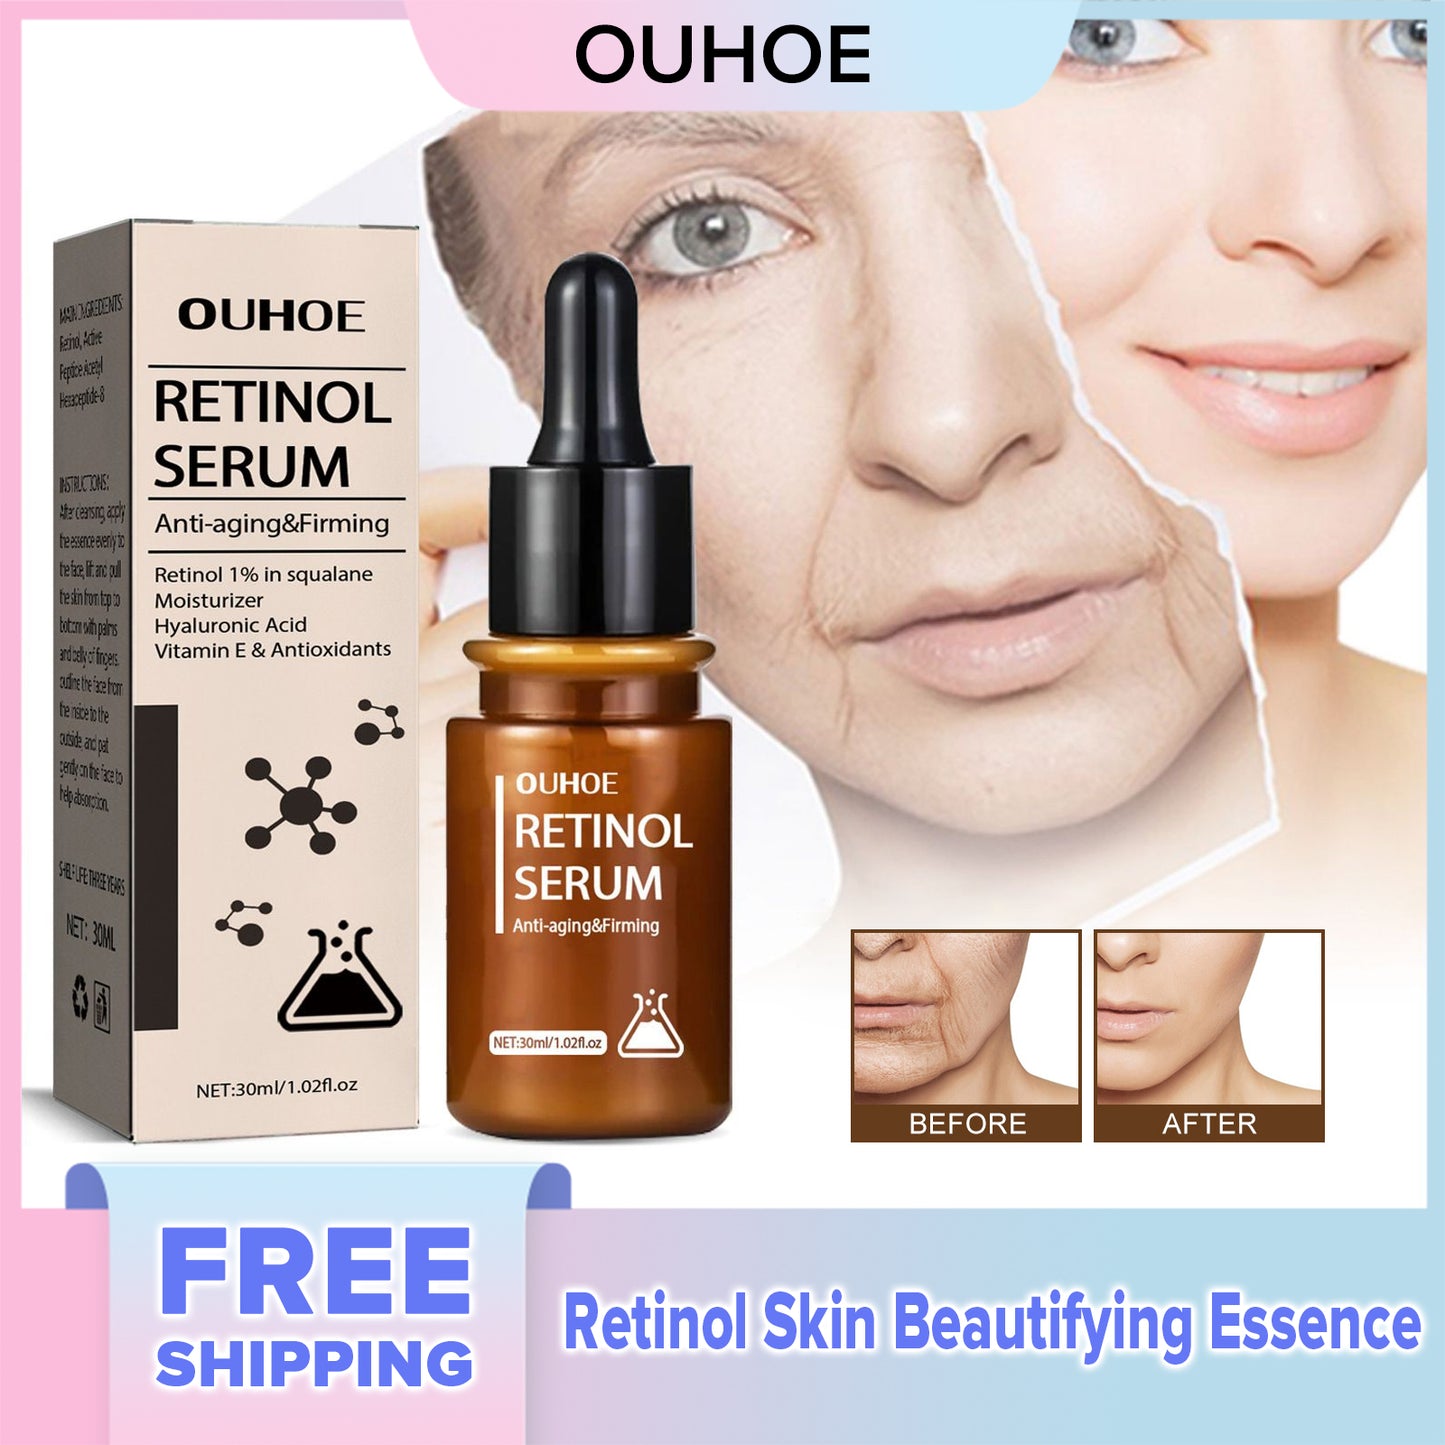 OUHOE Retinol Skin Beautifying Essence Attenuate Dry Lines, Fine Lines, Prevent Dullness, Moisturize, Tender Skin And Resist Wrinkles Essence(30ml)